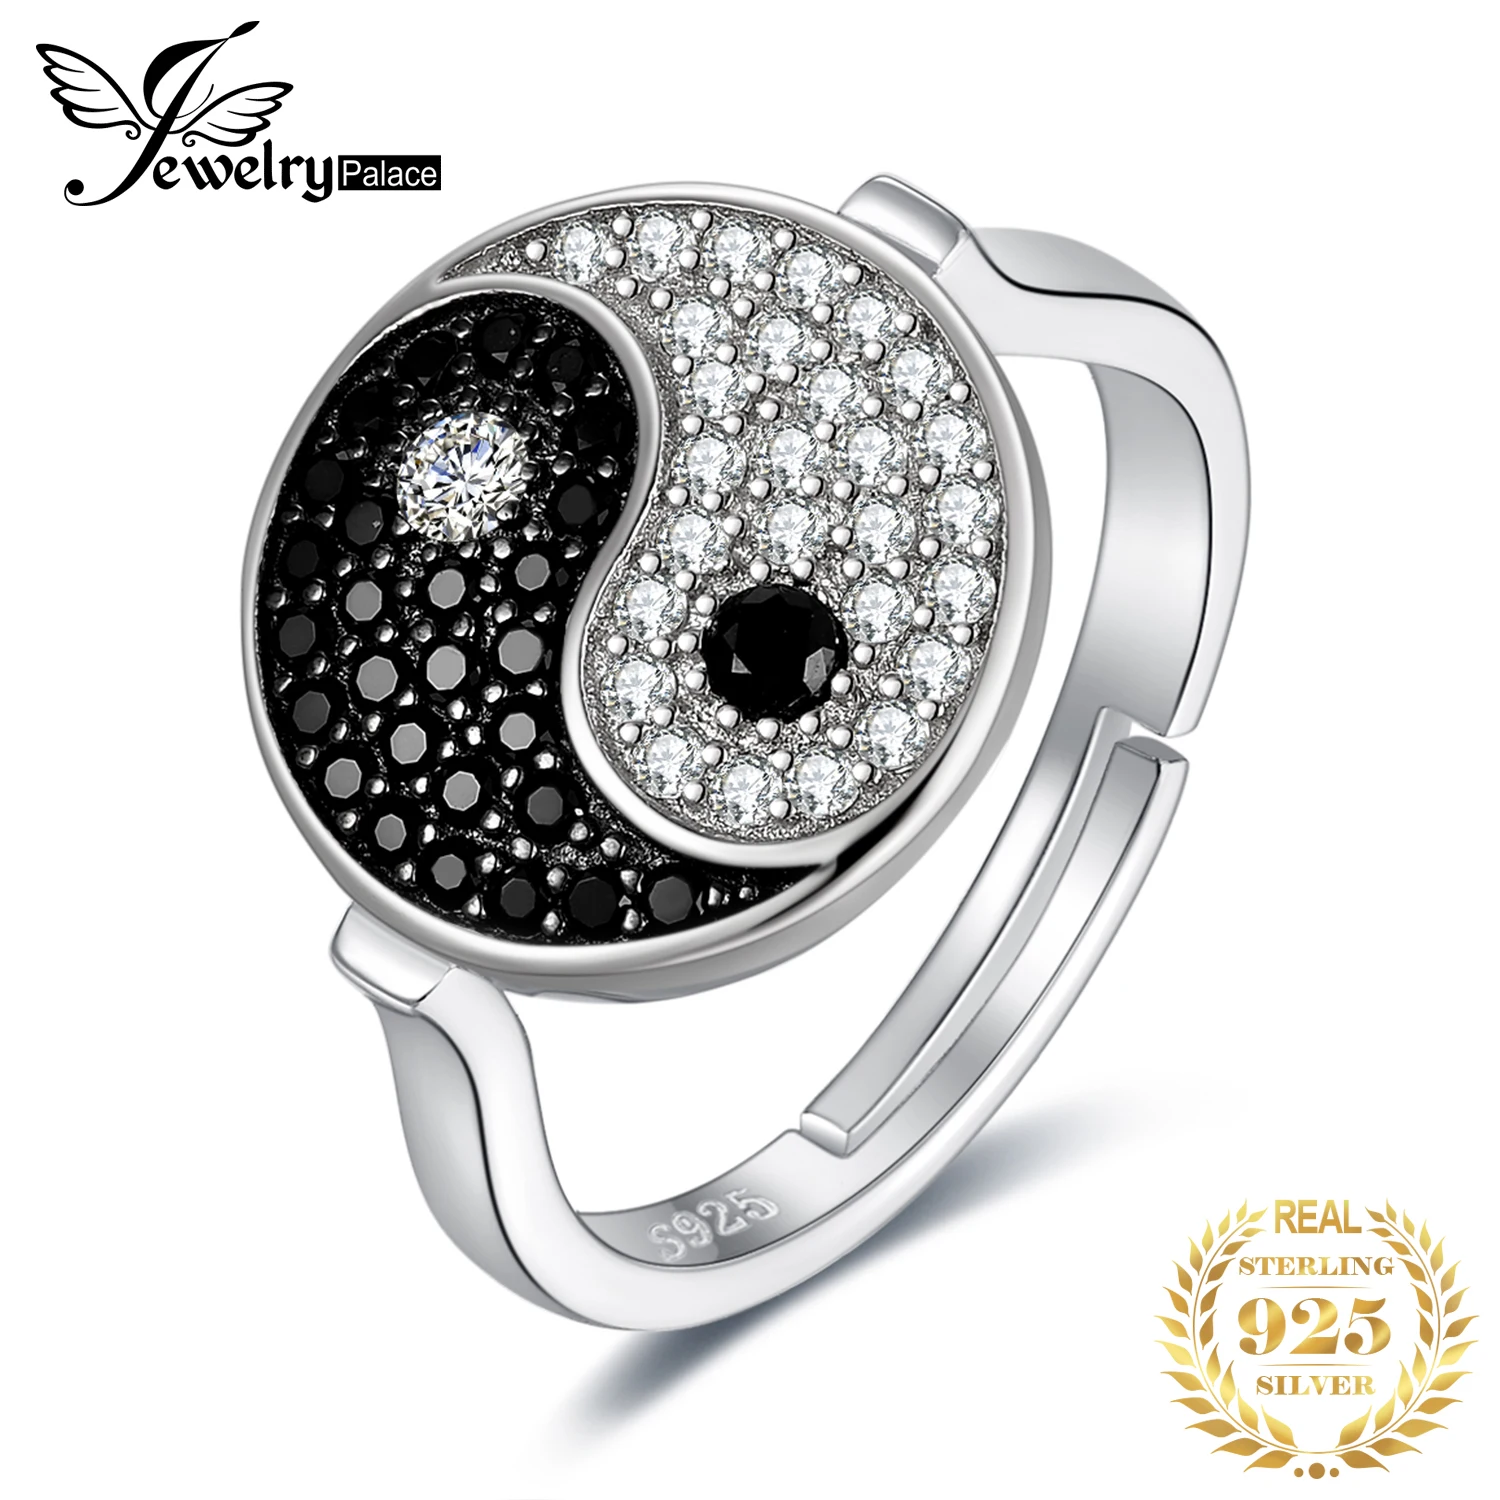 

JewelryPalace Tai Chi Yin Yang 925 Sterling Silver Adjustable Ring Unique Genuine Black Spinel Statement Open Rings for Women